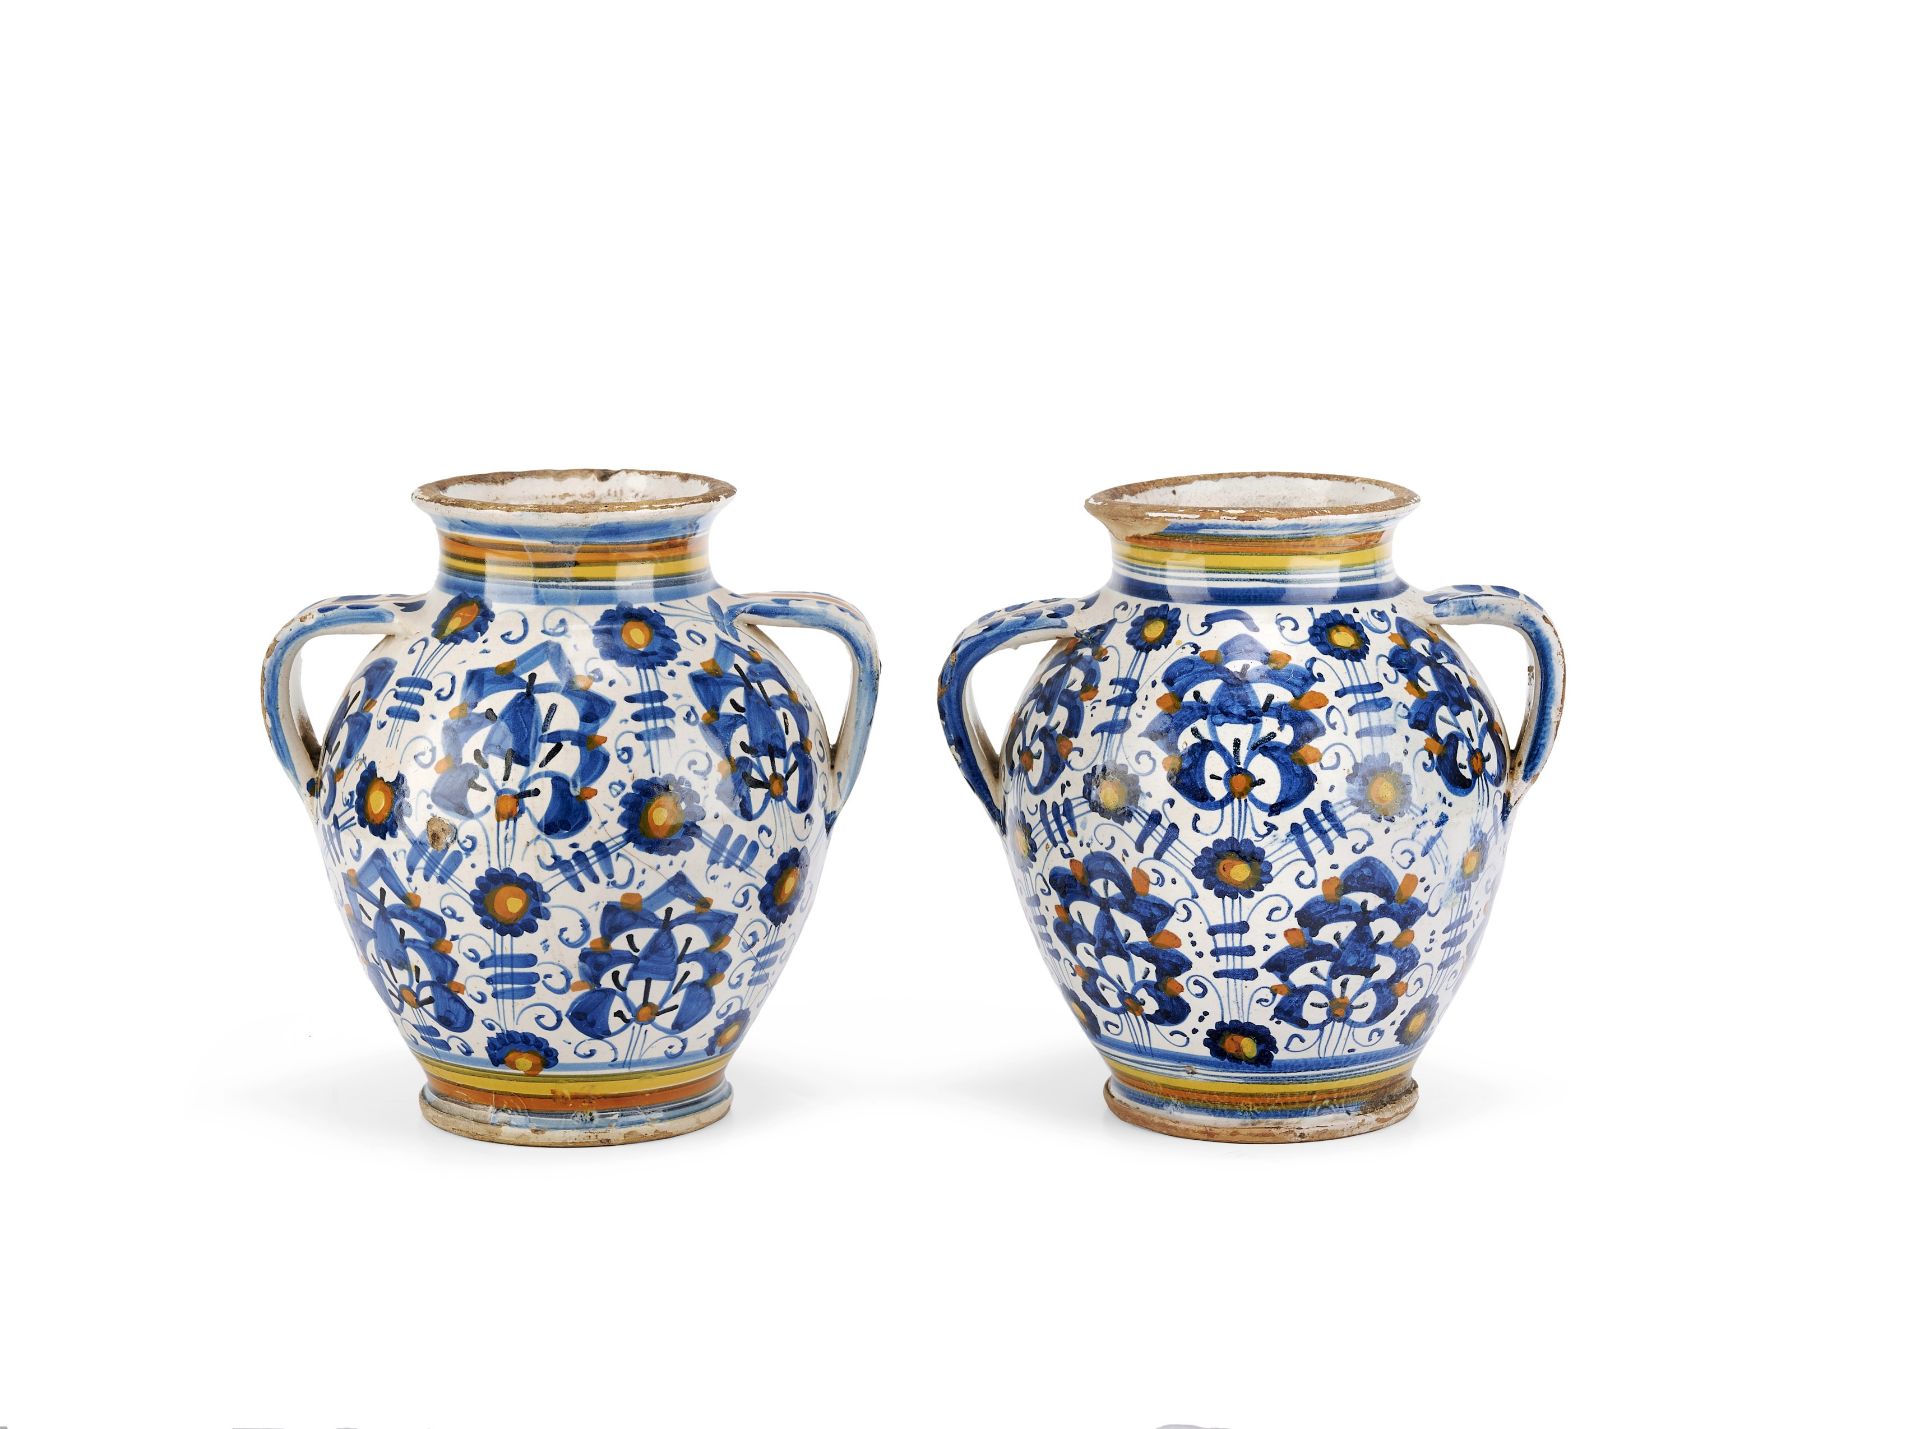 A pair of Montelupo maiolica two-handled jars, end of 16th century